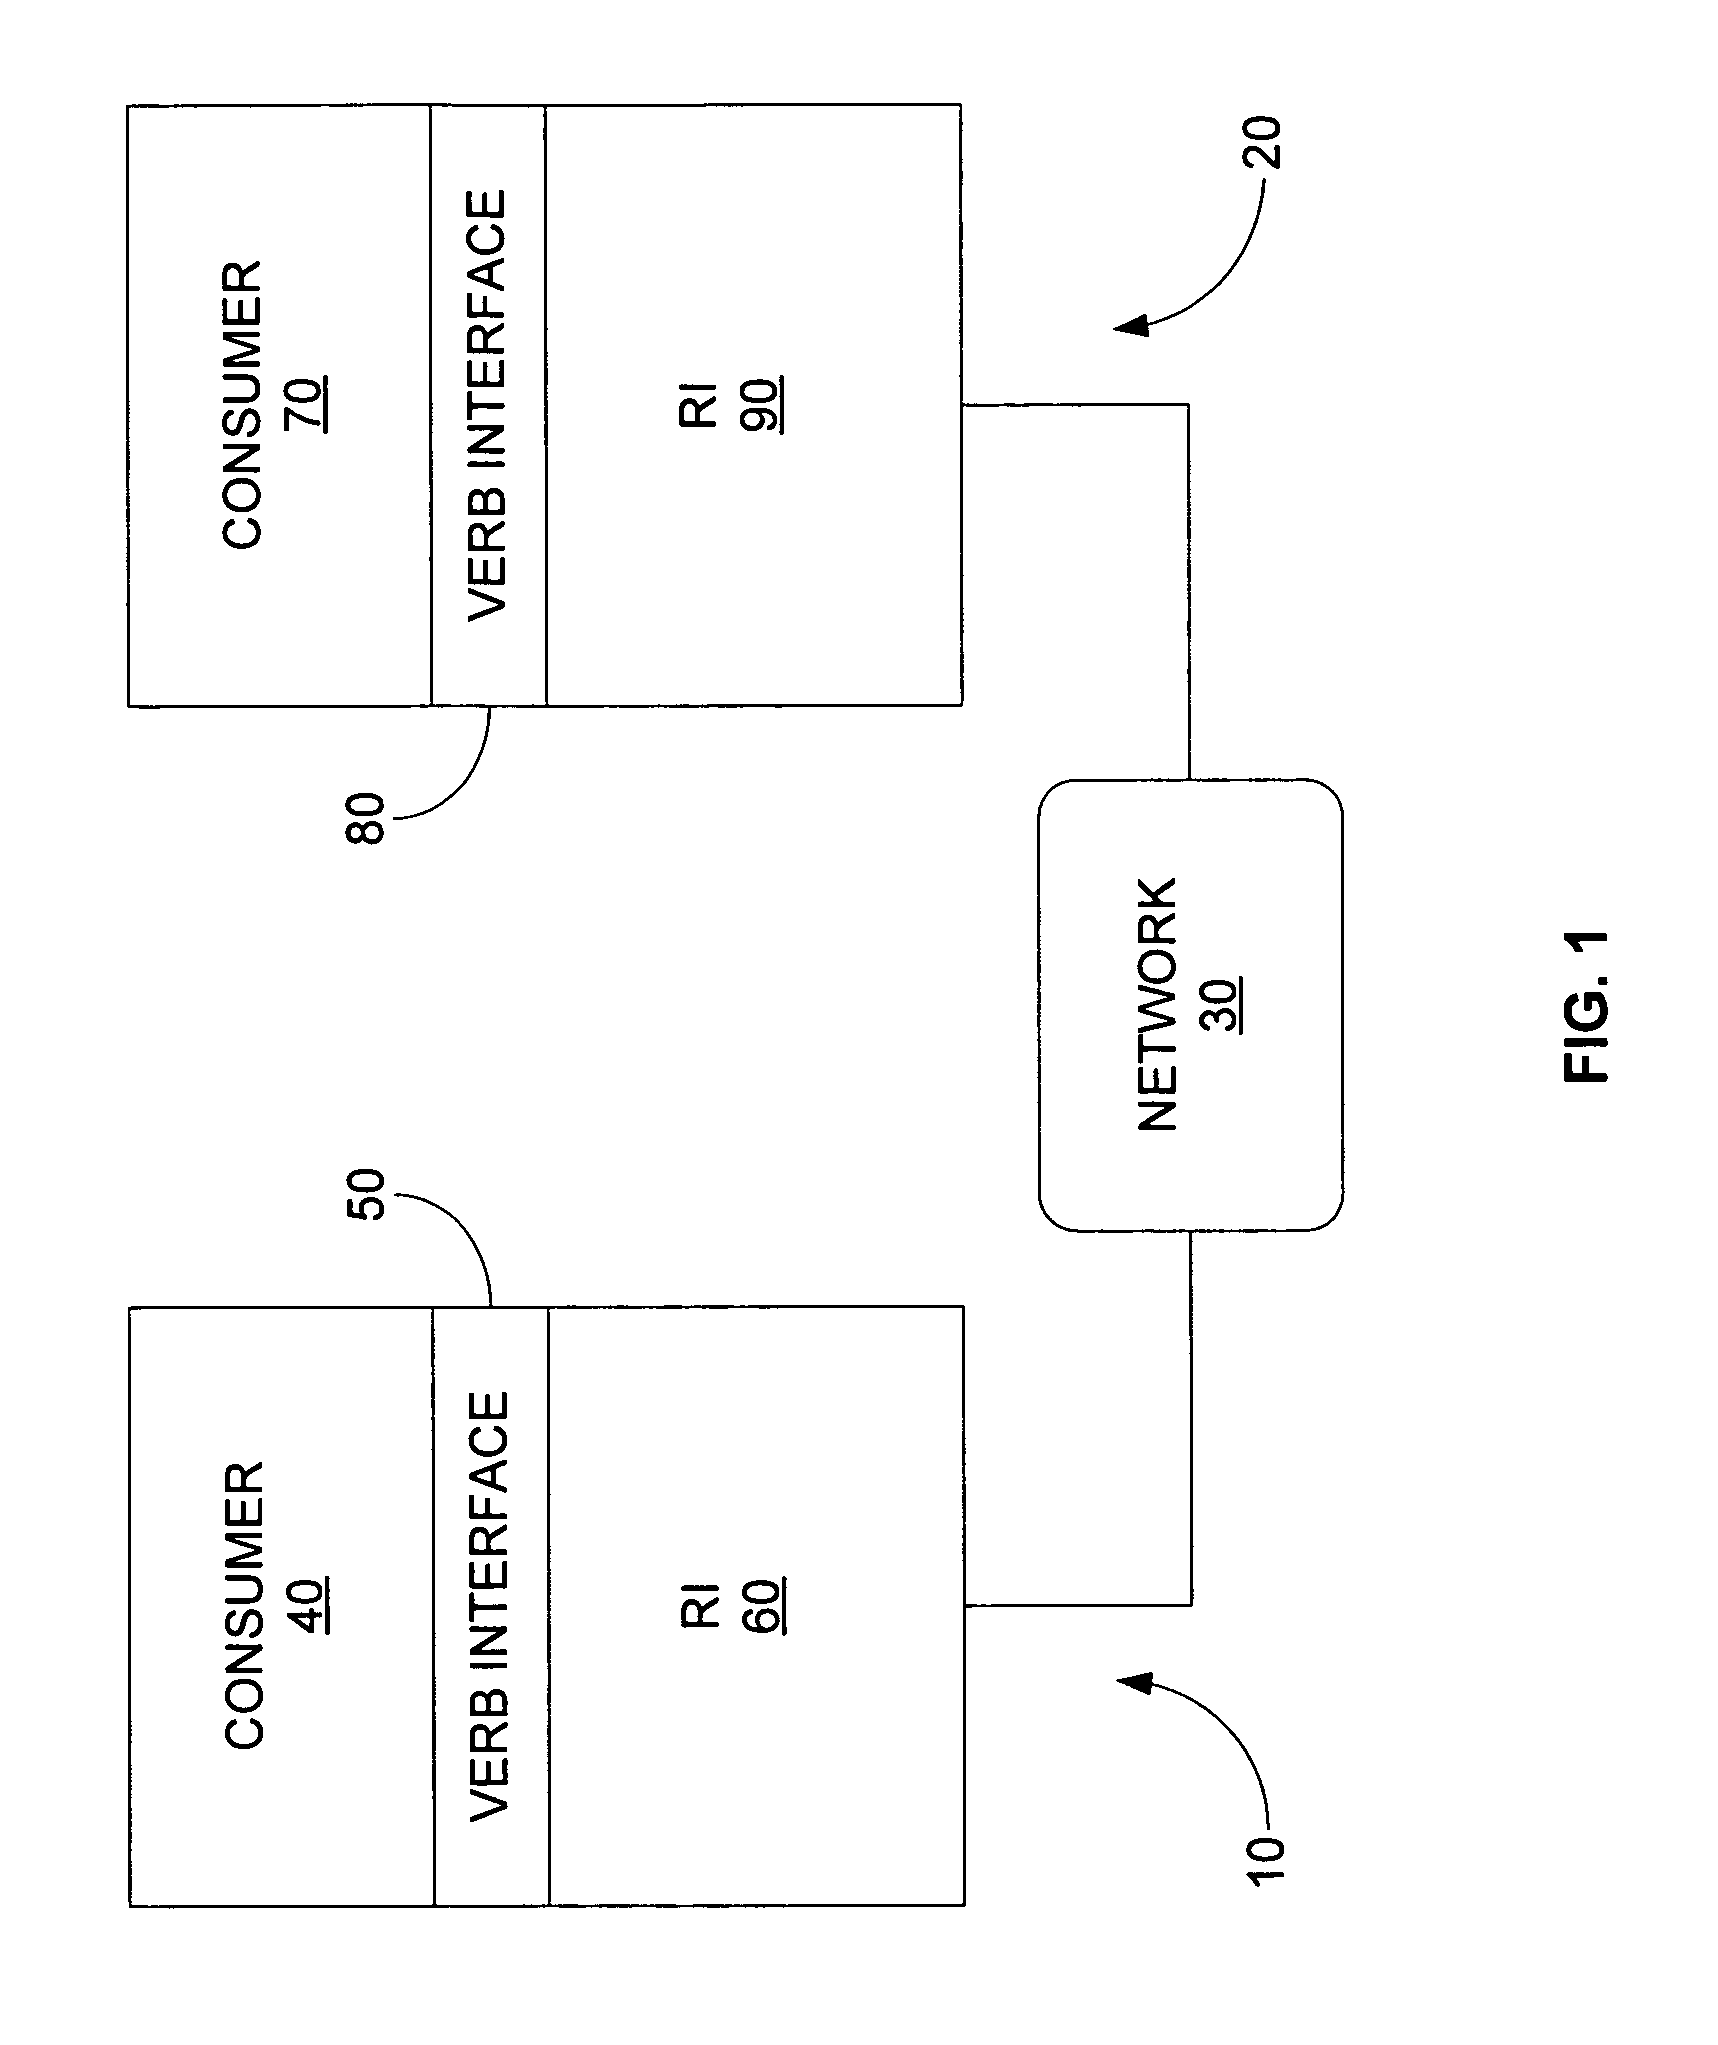 System and method for receive queue provisioning